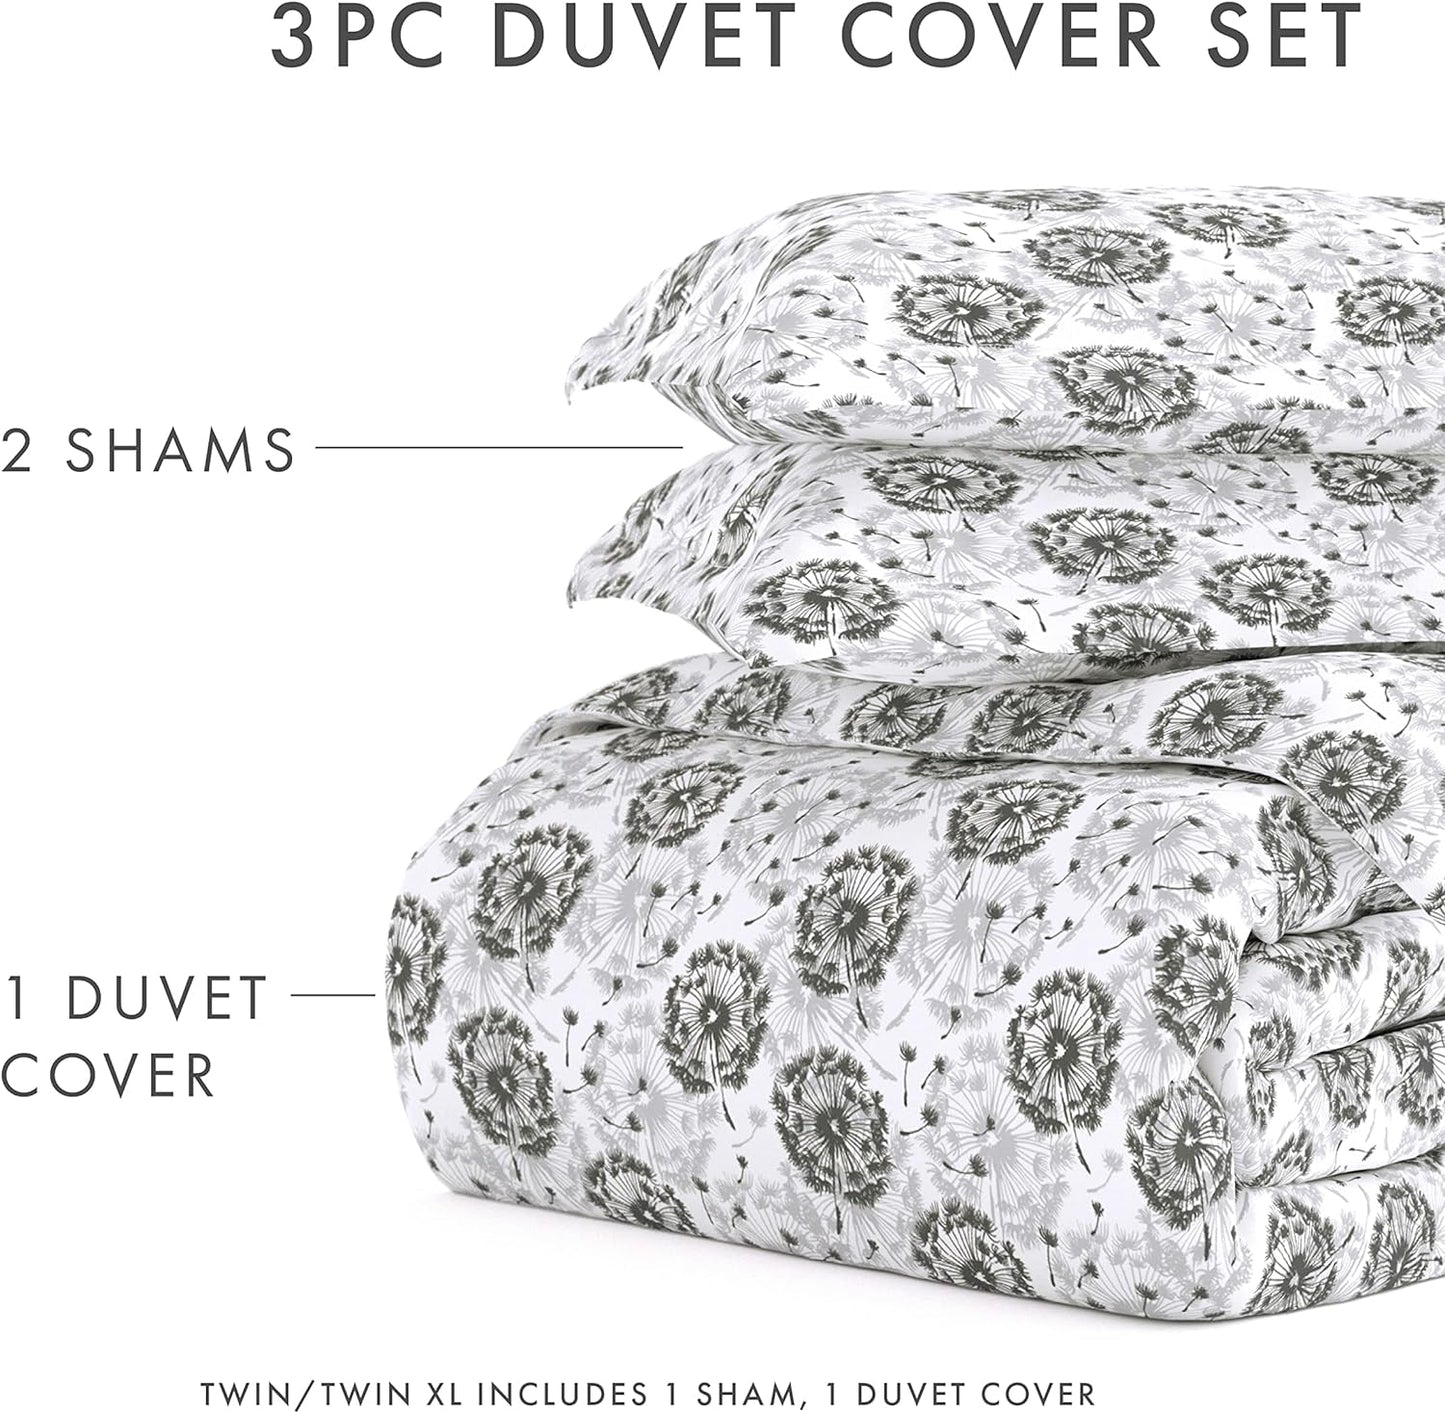 LINEN MARKET Duvet Cover Queen (Light Gray) - Experience Hotel-Like Comfort with Unparalleled Softness, Exquisite Prints & Solid Colors for a Dreamy Bedroom - Queen Duvet Cover Set with 2 Pillow Shams